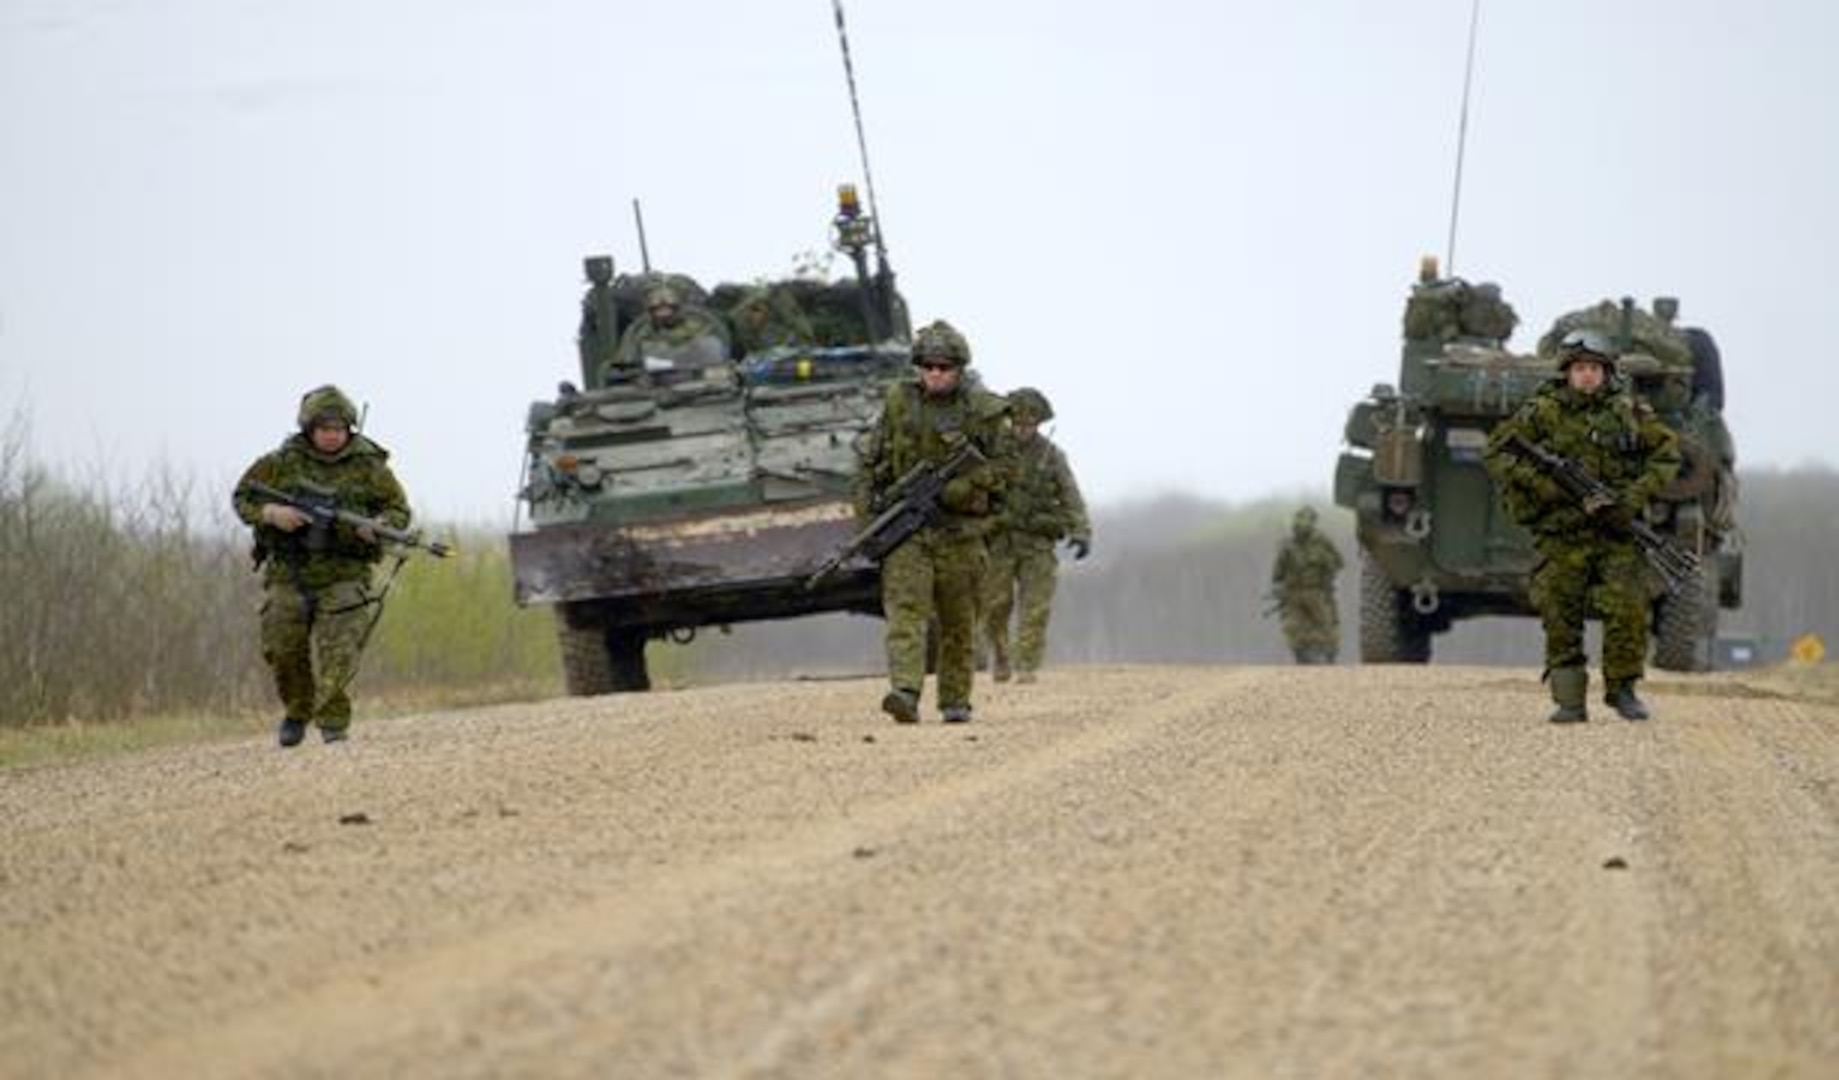 Members from 5 Canadian Mechanized Brigade Group dismount and conduct mine clearance drills in the training area of 3rd Canadian Division Support Group, Wainwright, AB during the main thrust of the advance party for Exercise MAPLE RESOLVE 15, 6 May 15.